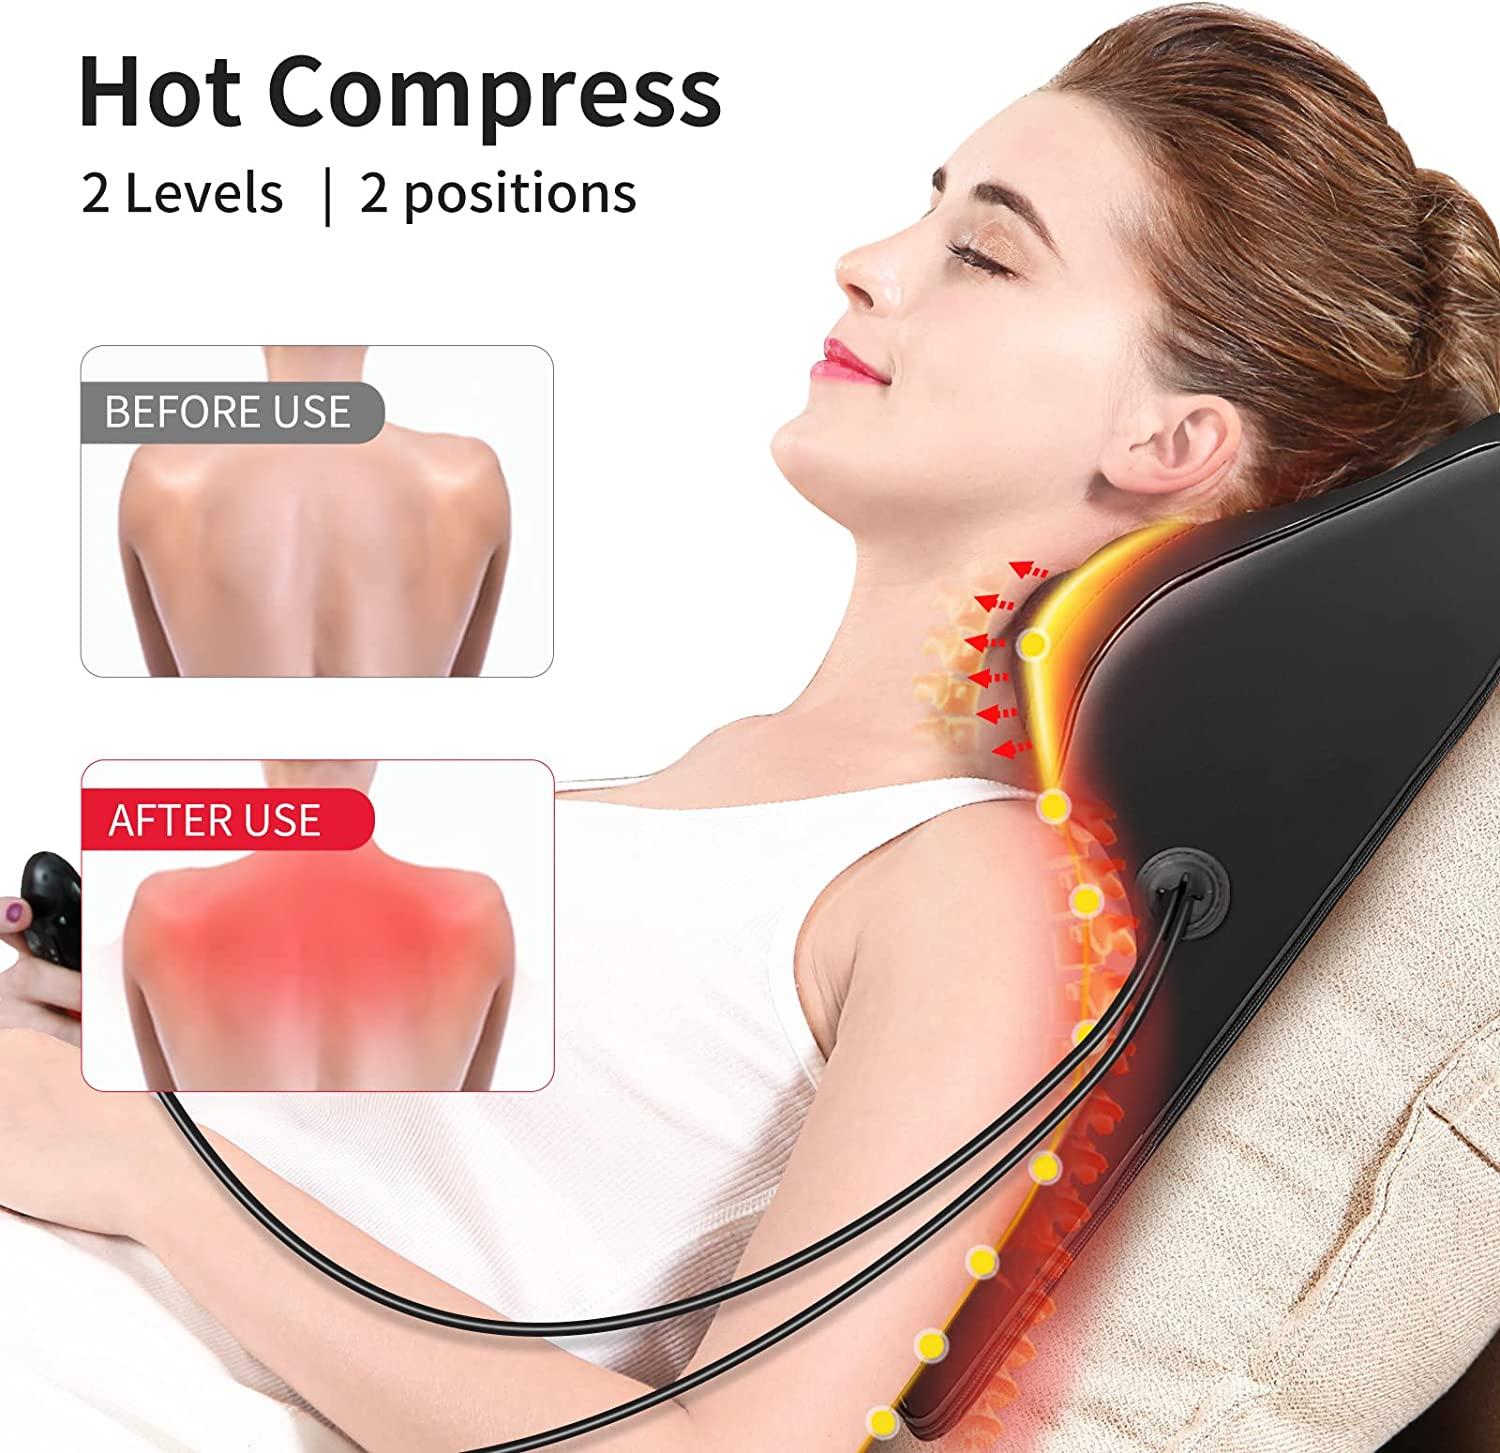  Massager with Heat - Deep Tissue Kneading Electric Back Massage  for Neck, Back, Shoulder, Waist, Foot - Shiatsu Full Body Massage, Relax  Gift for Her/Him/Friend/Dad/Mom : Health & Household